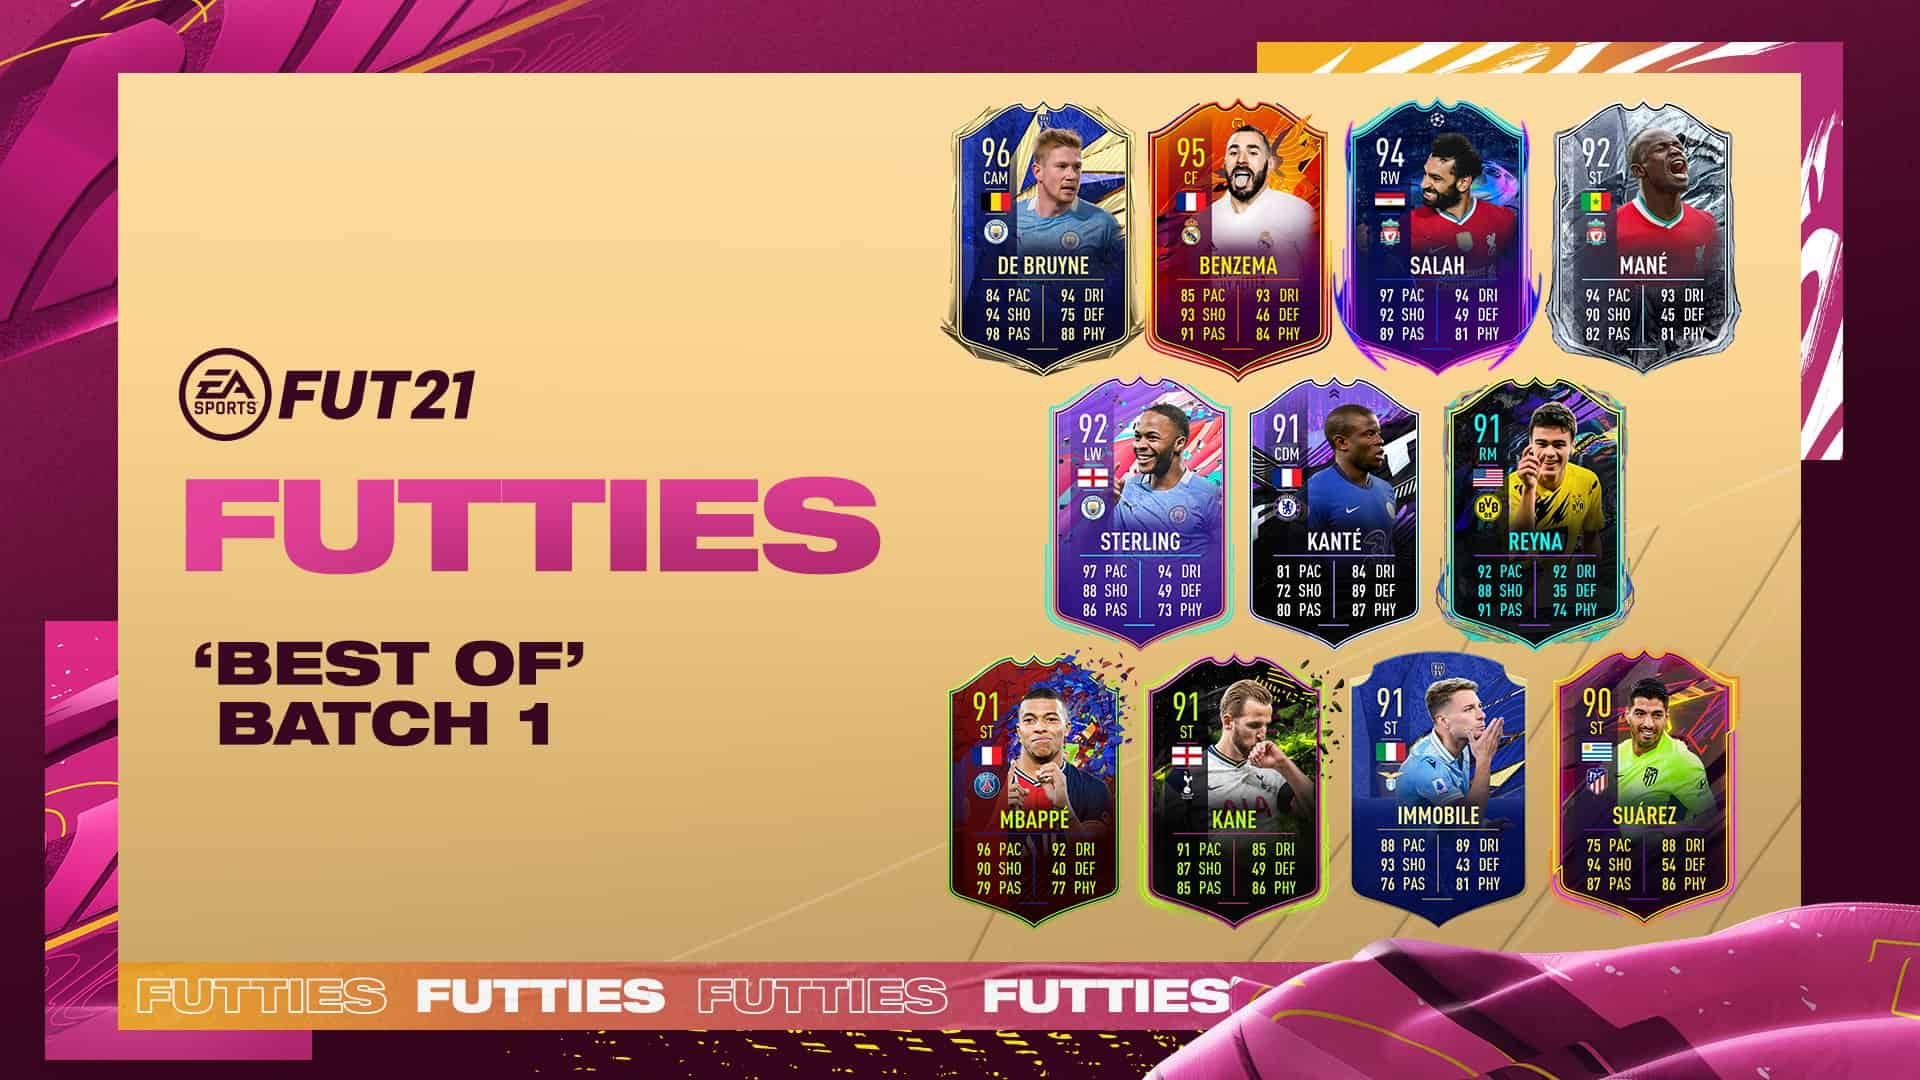 FIFA 21 FUTTIES Best of Batch 1 available in game TOTY